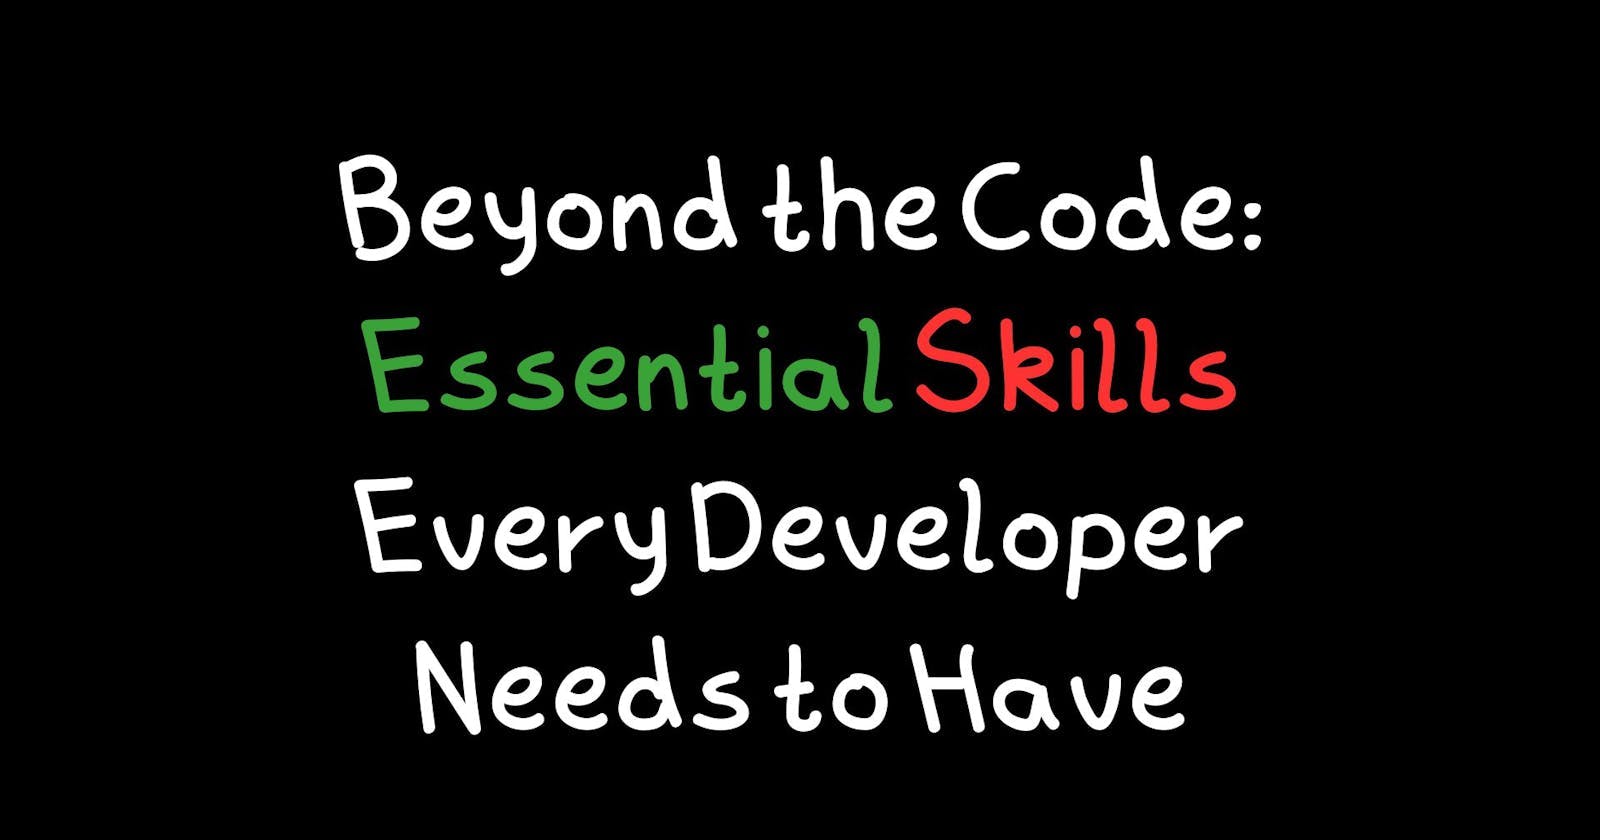 Beyond the Code: Essential Skills Every Developer Needs to Have